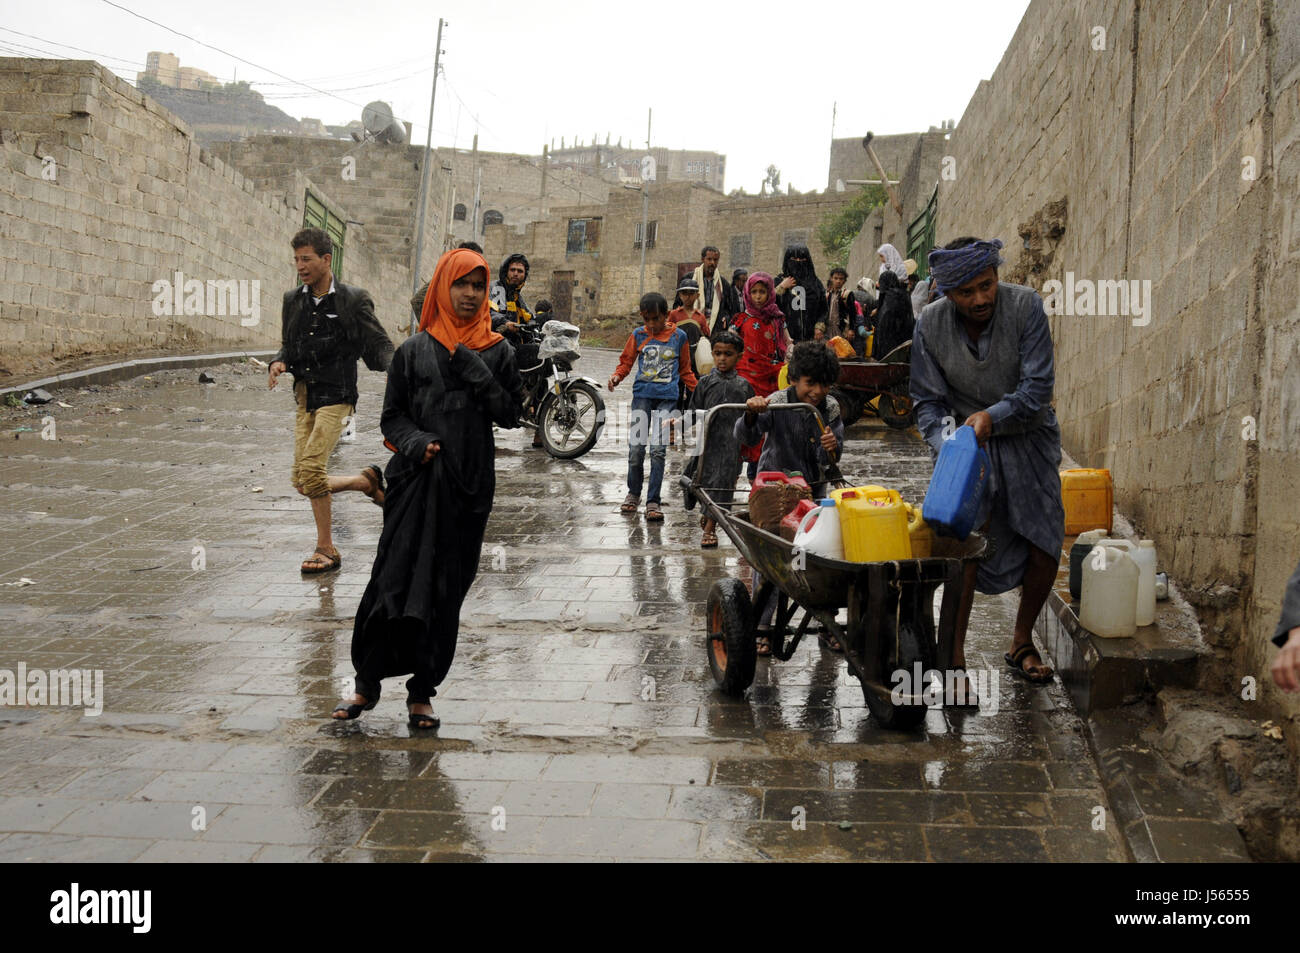 Sanaa, Yemen. 16th May, 2017. People wait to collect clean water from a charity water pump during a rain as they face clean water shortage in Sanaa, Yemen on May 16, 2017. Contaminated water is a reason causing the cholera disease in Yemen. Credit: Mohammed Mohammed/Xinhua/Alamy Live News Stock Photo